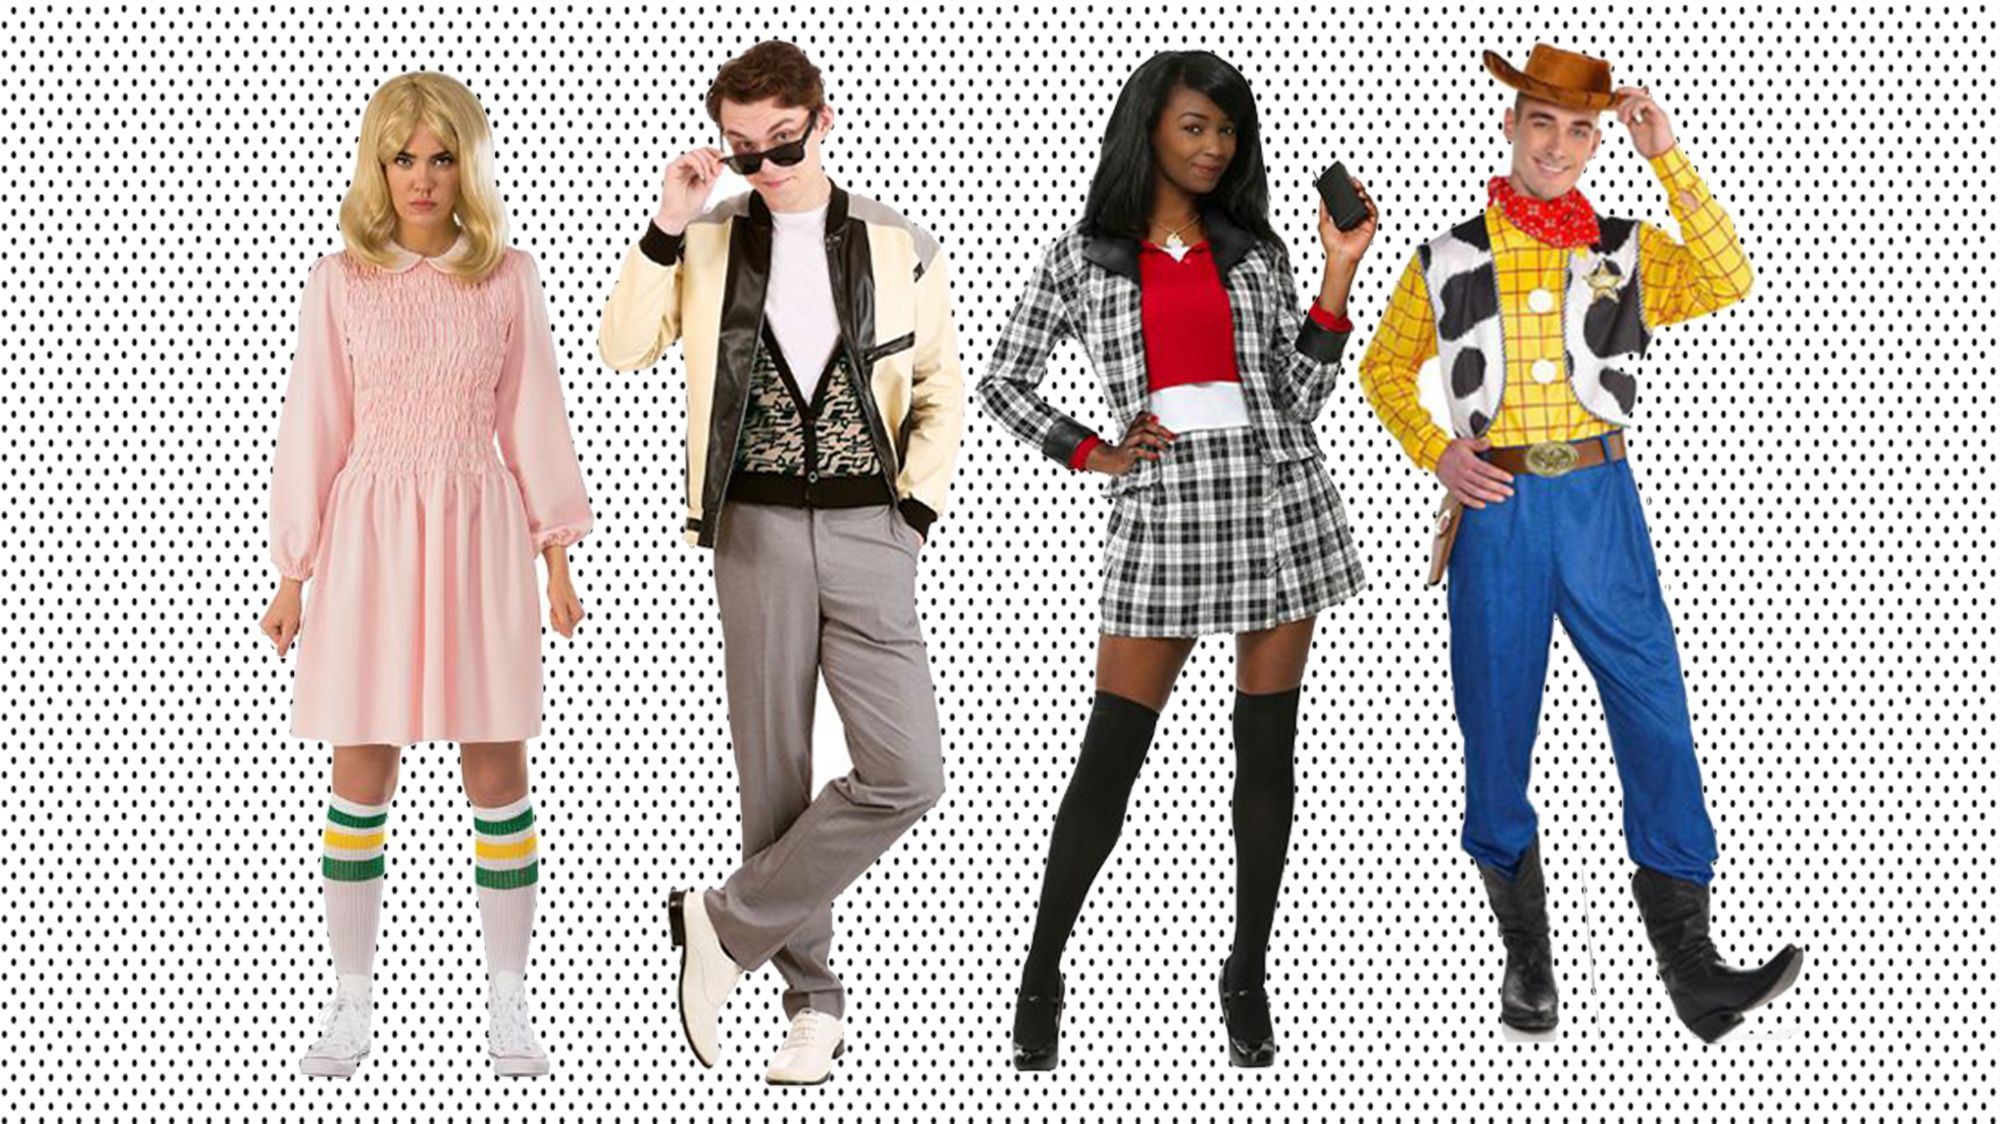 Best Halloween Costumes 2019 for Adults: Popular and Funny Costume Ideas for Men and Women | CNN Underscored